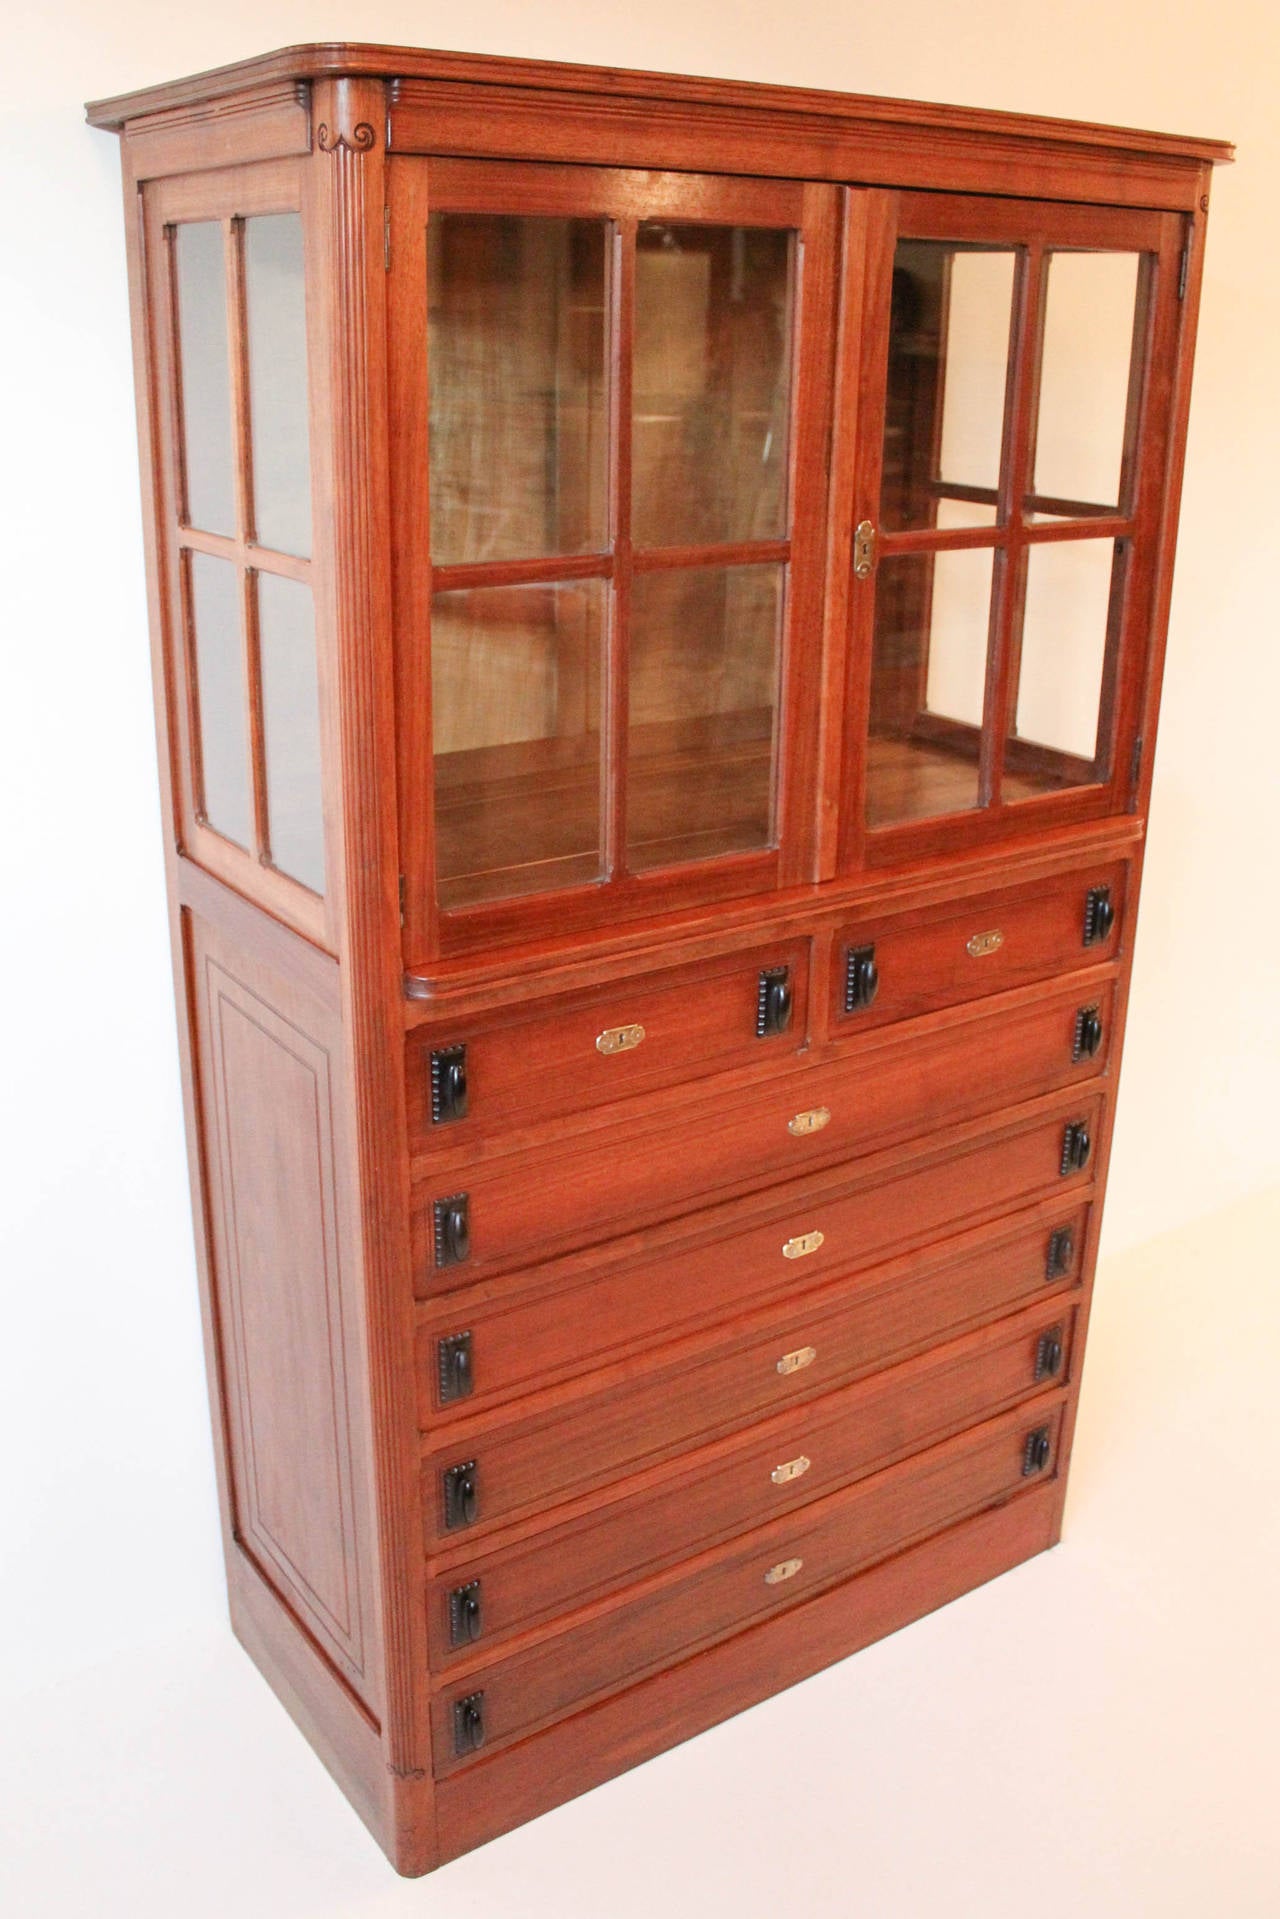 Early 20th Century Rare and important Art Deco Display Cabinet by Jac van den Bosch